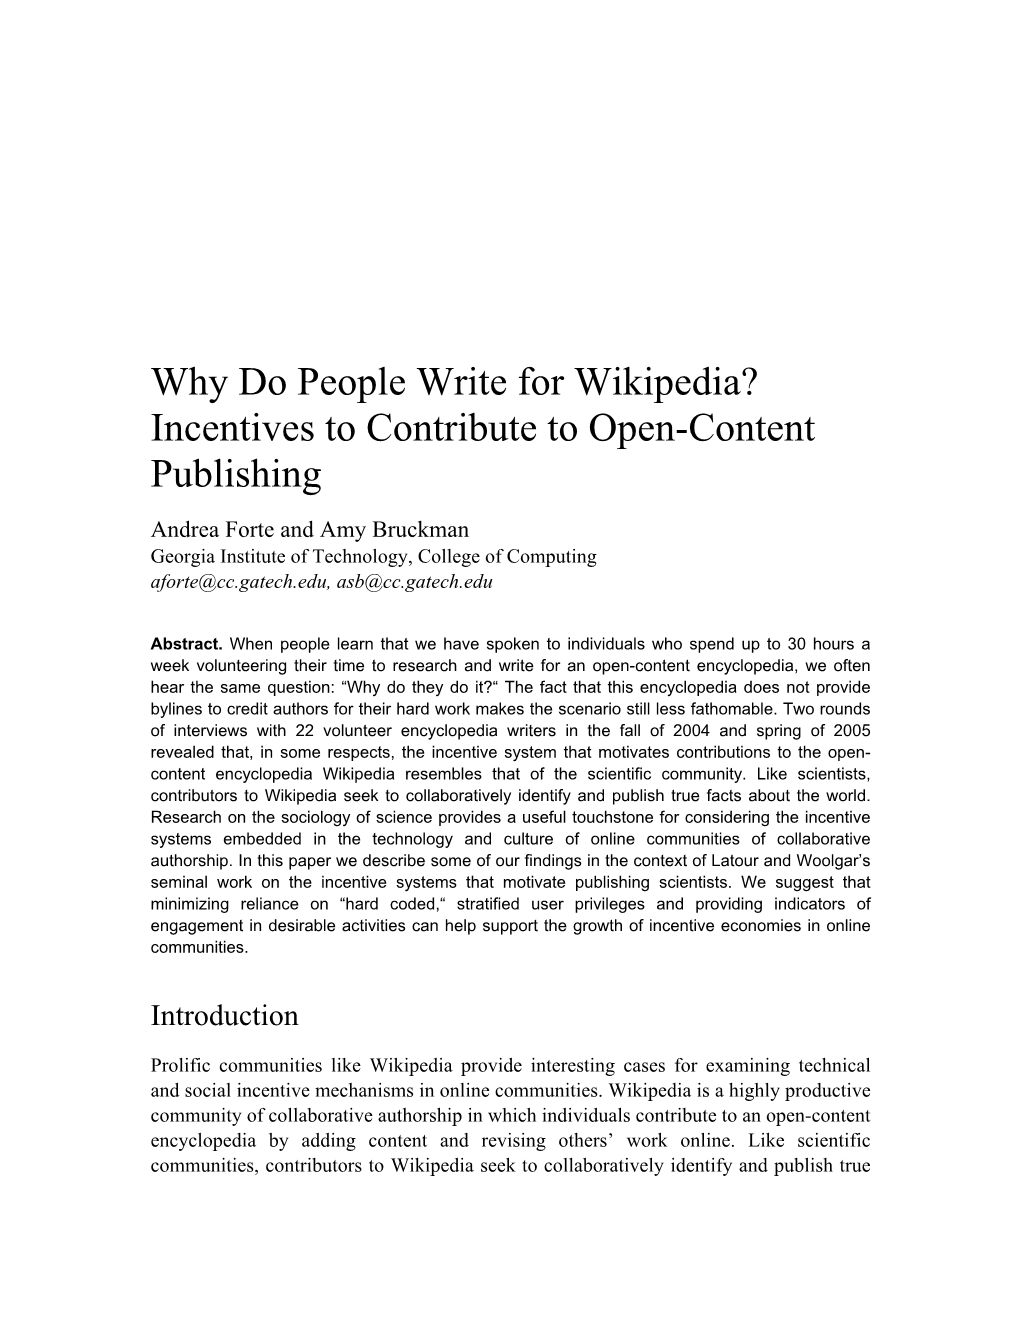 Why Do People Write for Wikipedia? Incentives to Contribute to Open-Content Publishing